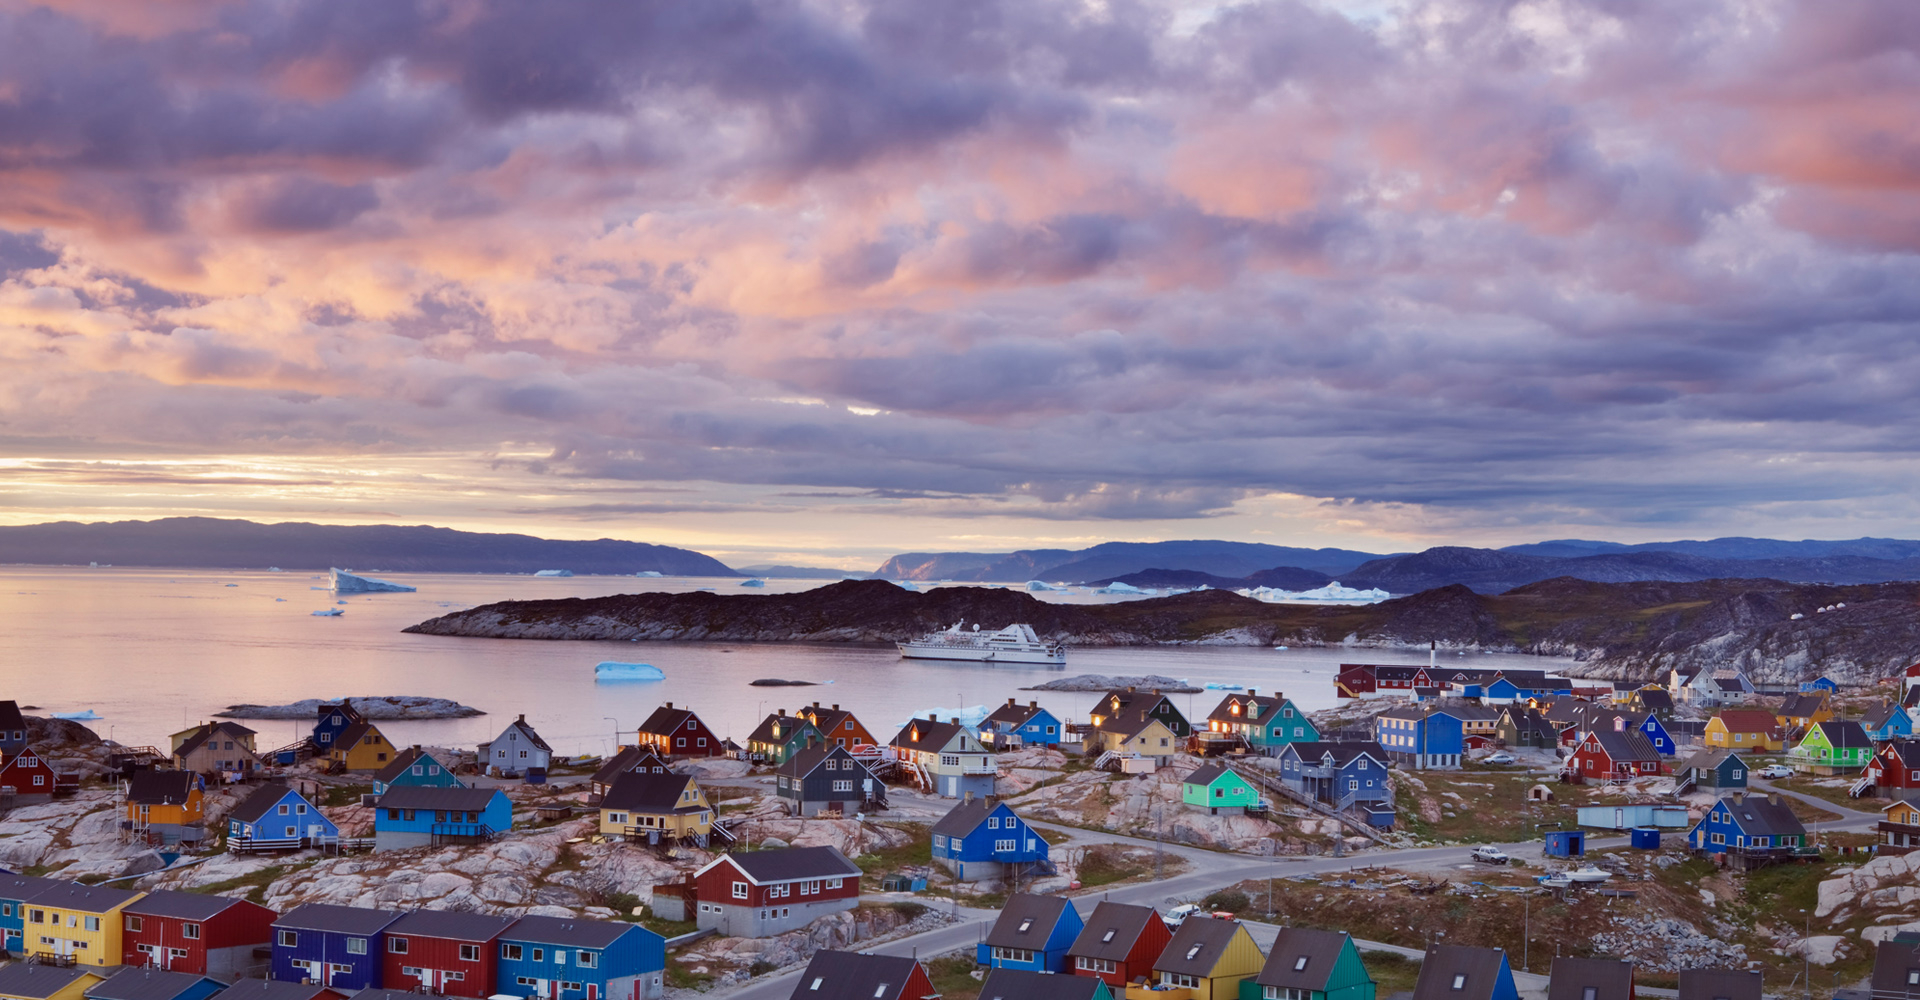 Popular Greenland Image for Phone